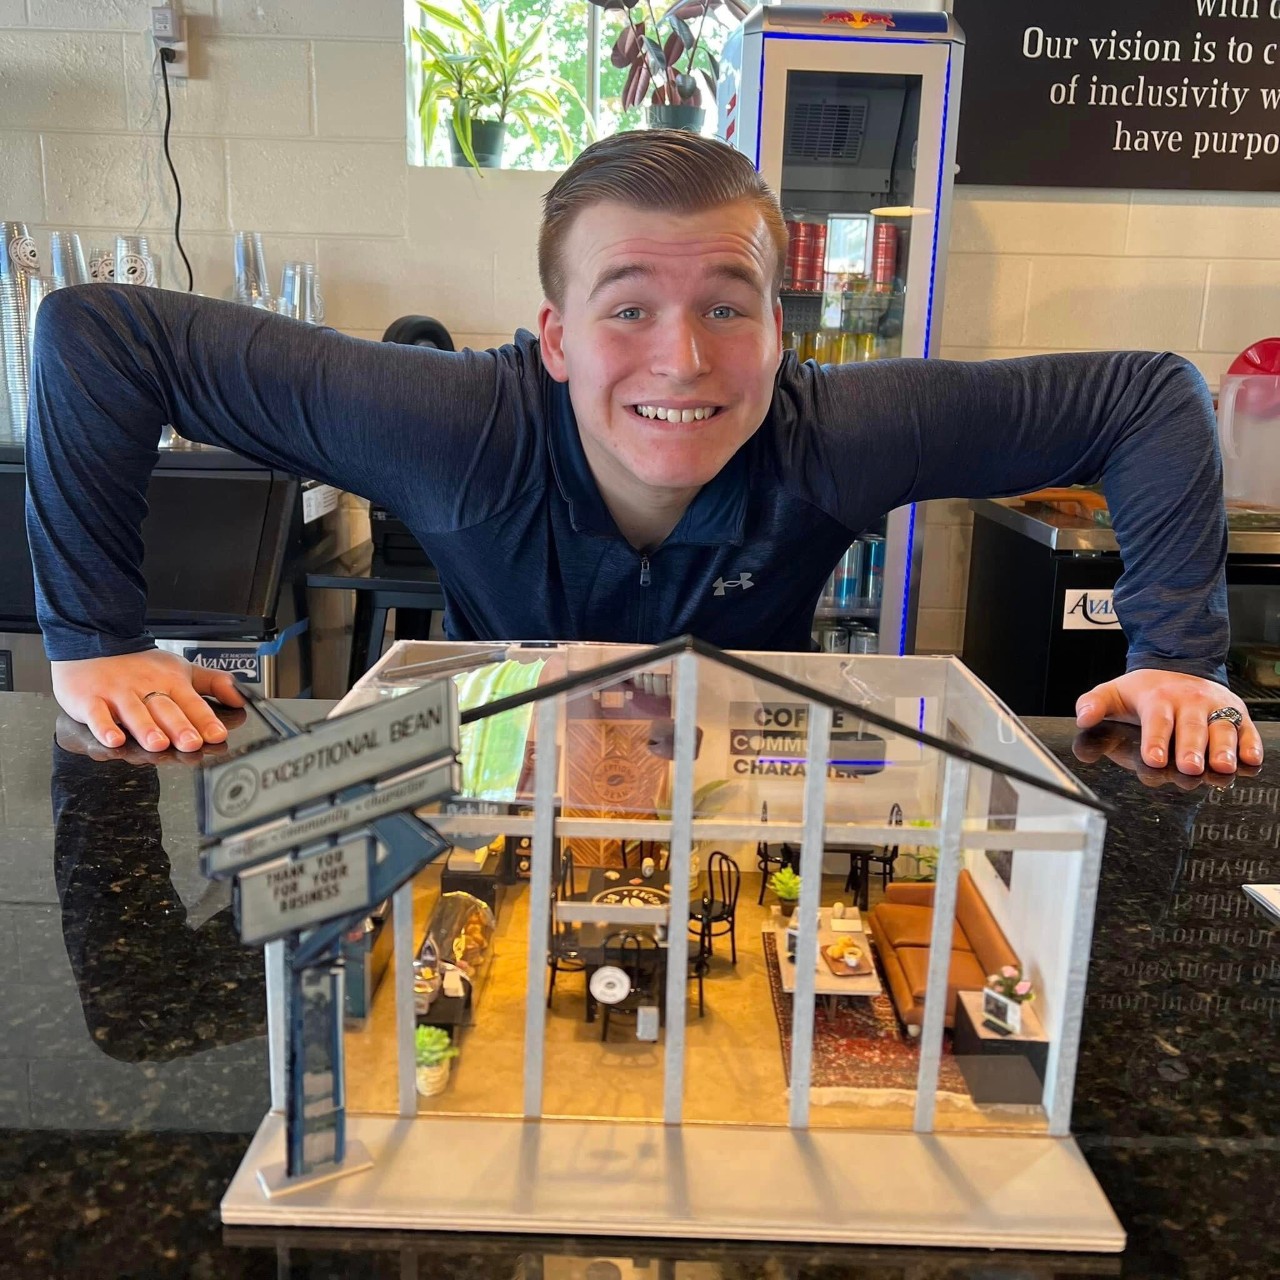 A white, young man with short, sandy-colored hair grins at the camera, eyebrows raised, as he hovers over a miniature building model resting on a countertop. The building is a miniature coffee shop, with a sign out front that reads “EXCEPTIONAL BEAN.” 